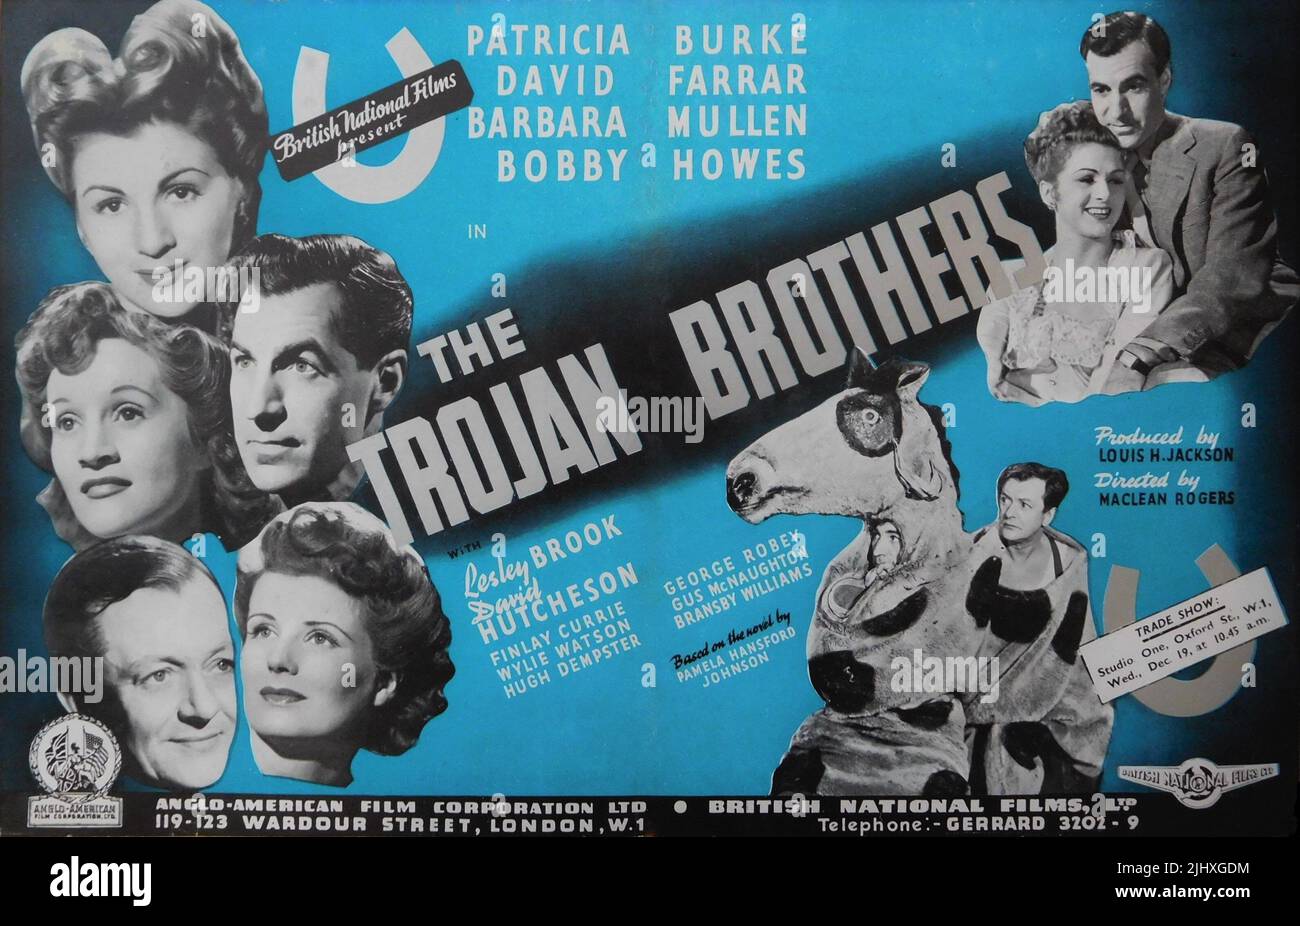 PATRICIA BURKE DAVID FARRAR BARBARA MULLEN and BOBBY HOWES in THE TROJAN BROTHERS 1946 director MACLEAN ROGERS novel Pamela Hansford Johnson producer Louis H. Jackson British National Films / Anglo-American Film Corporation Stock Photo